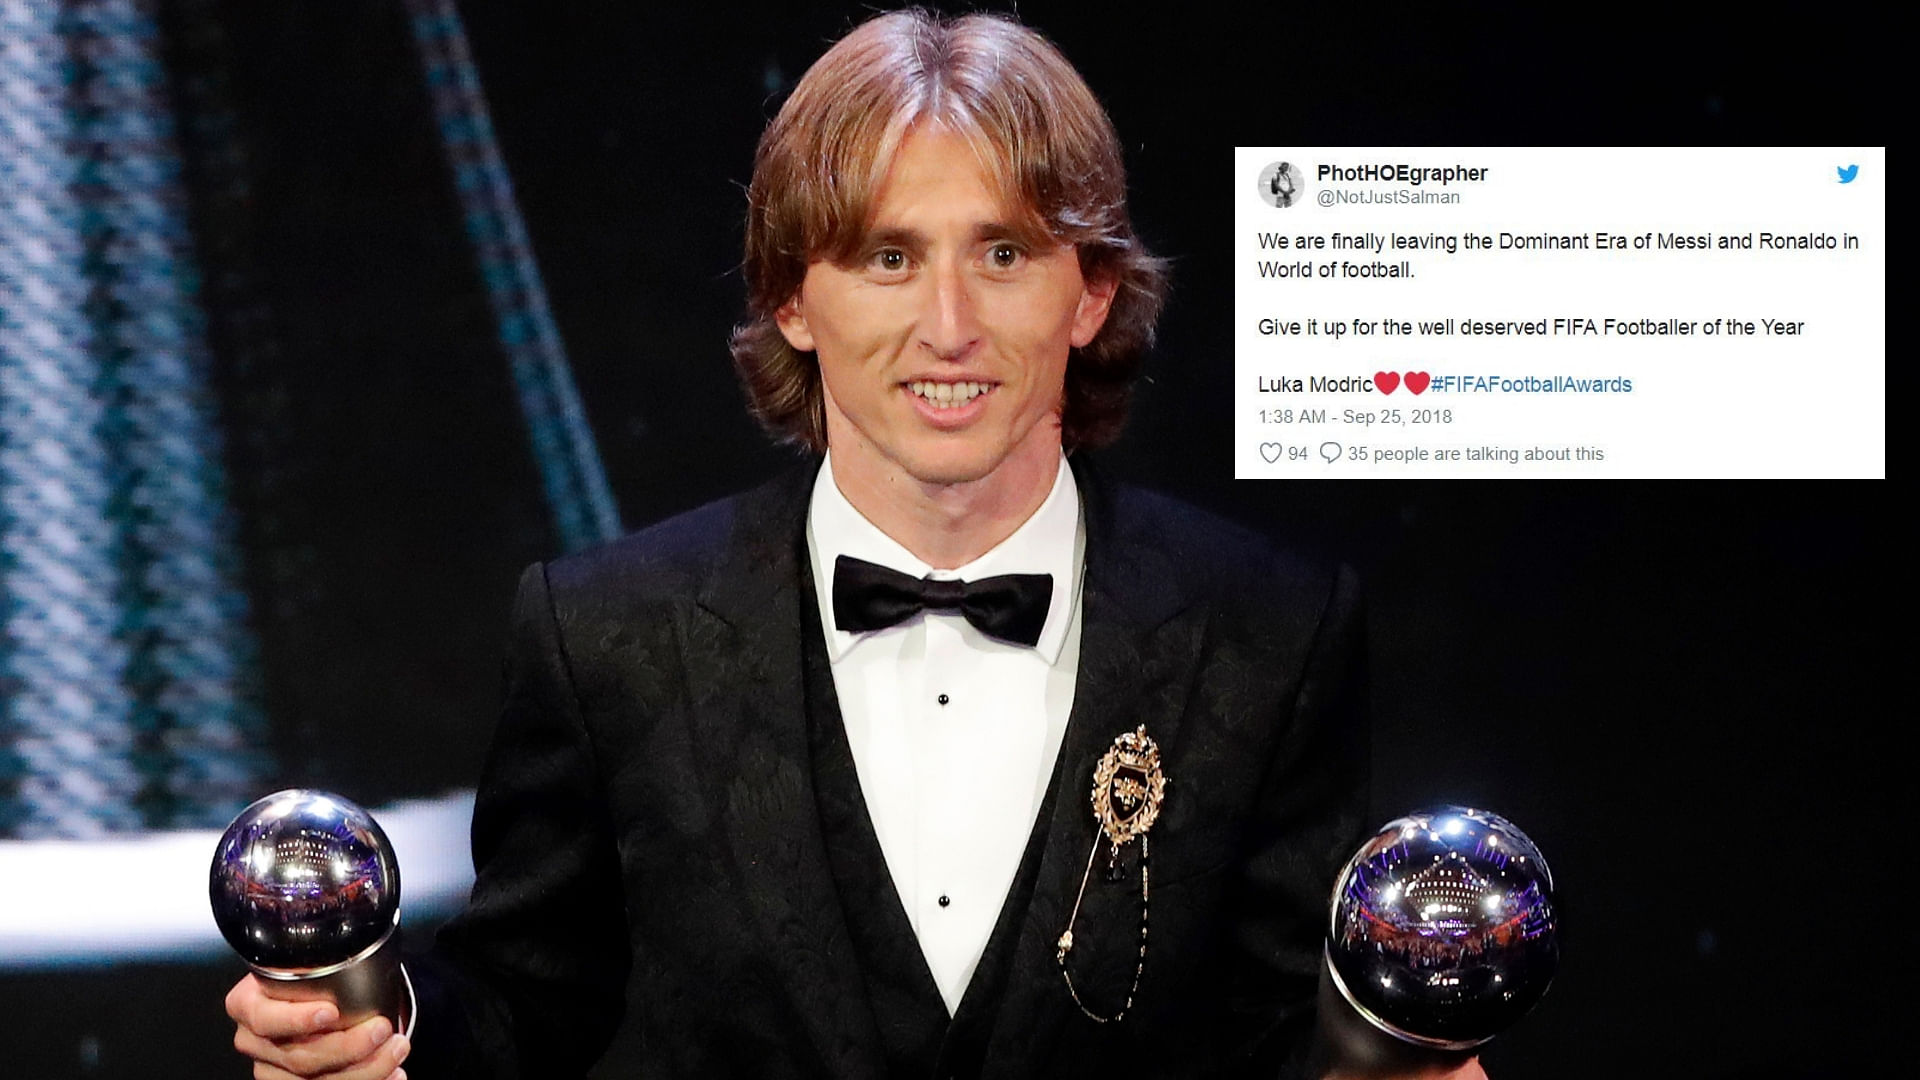 Croatia’s Luka Modric received the Best FIFA Men’s Player award during the ceremony of the Best FIFA Football Awards in the Royal Festival Hall in London.